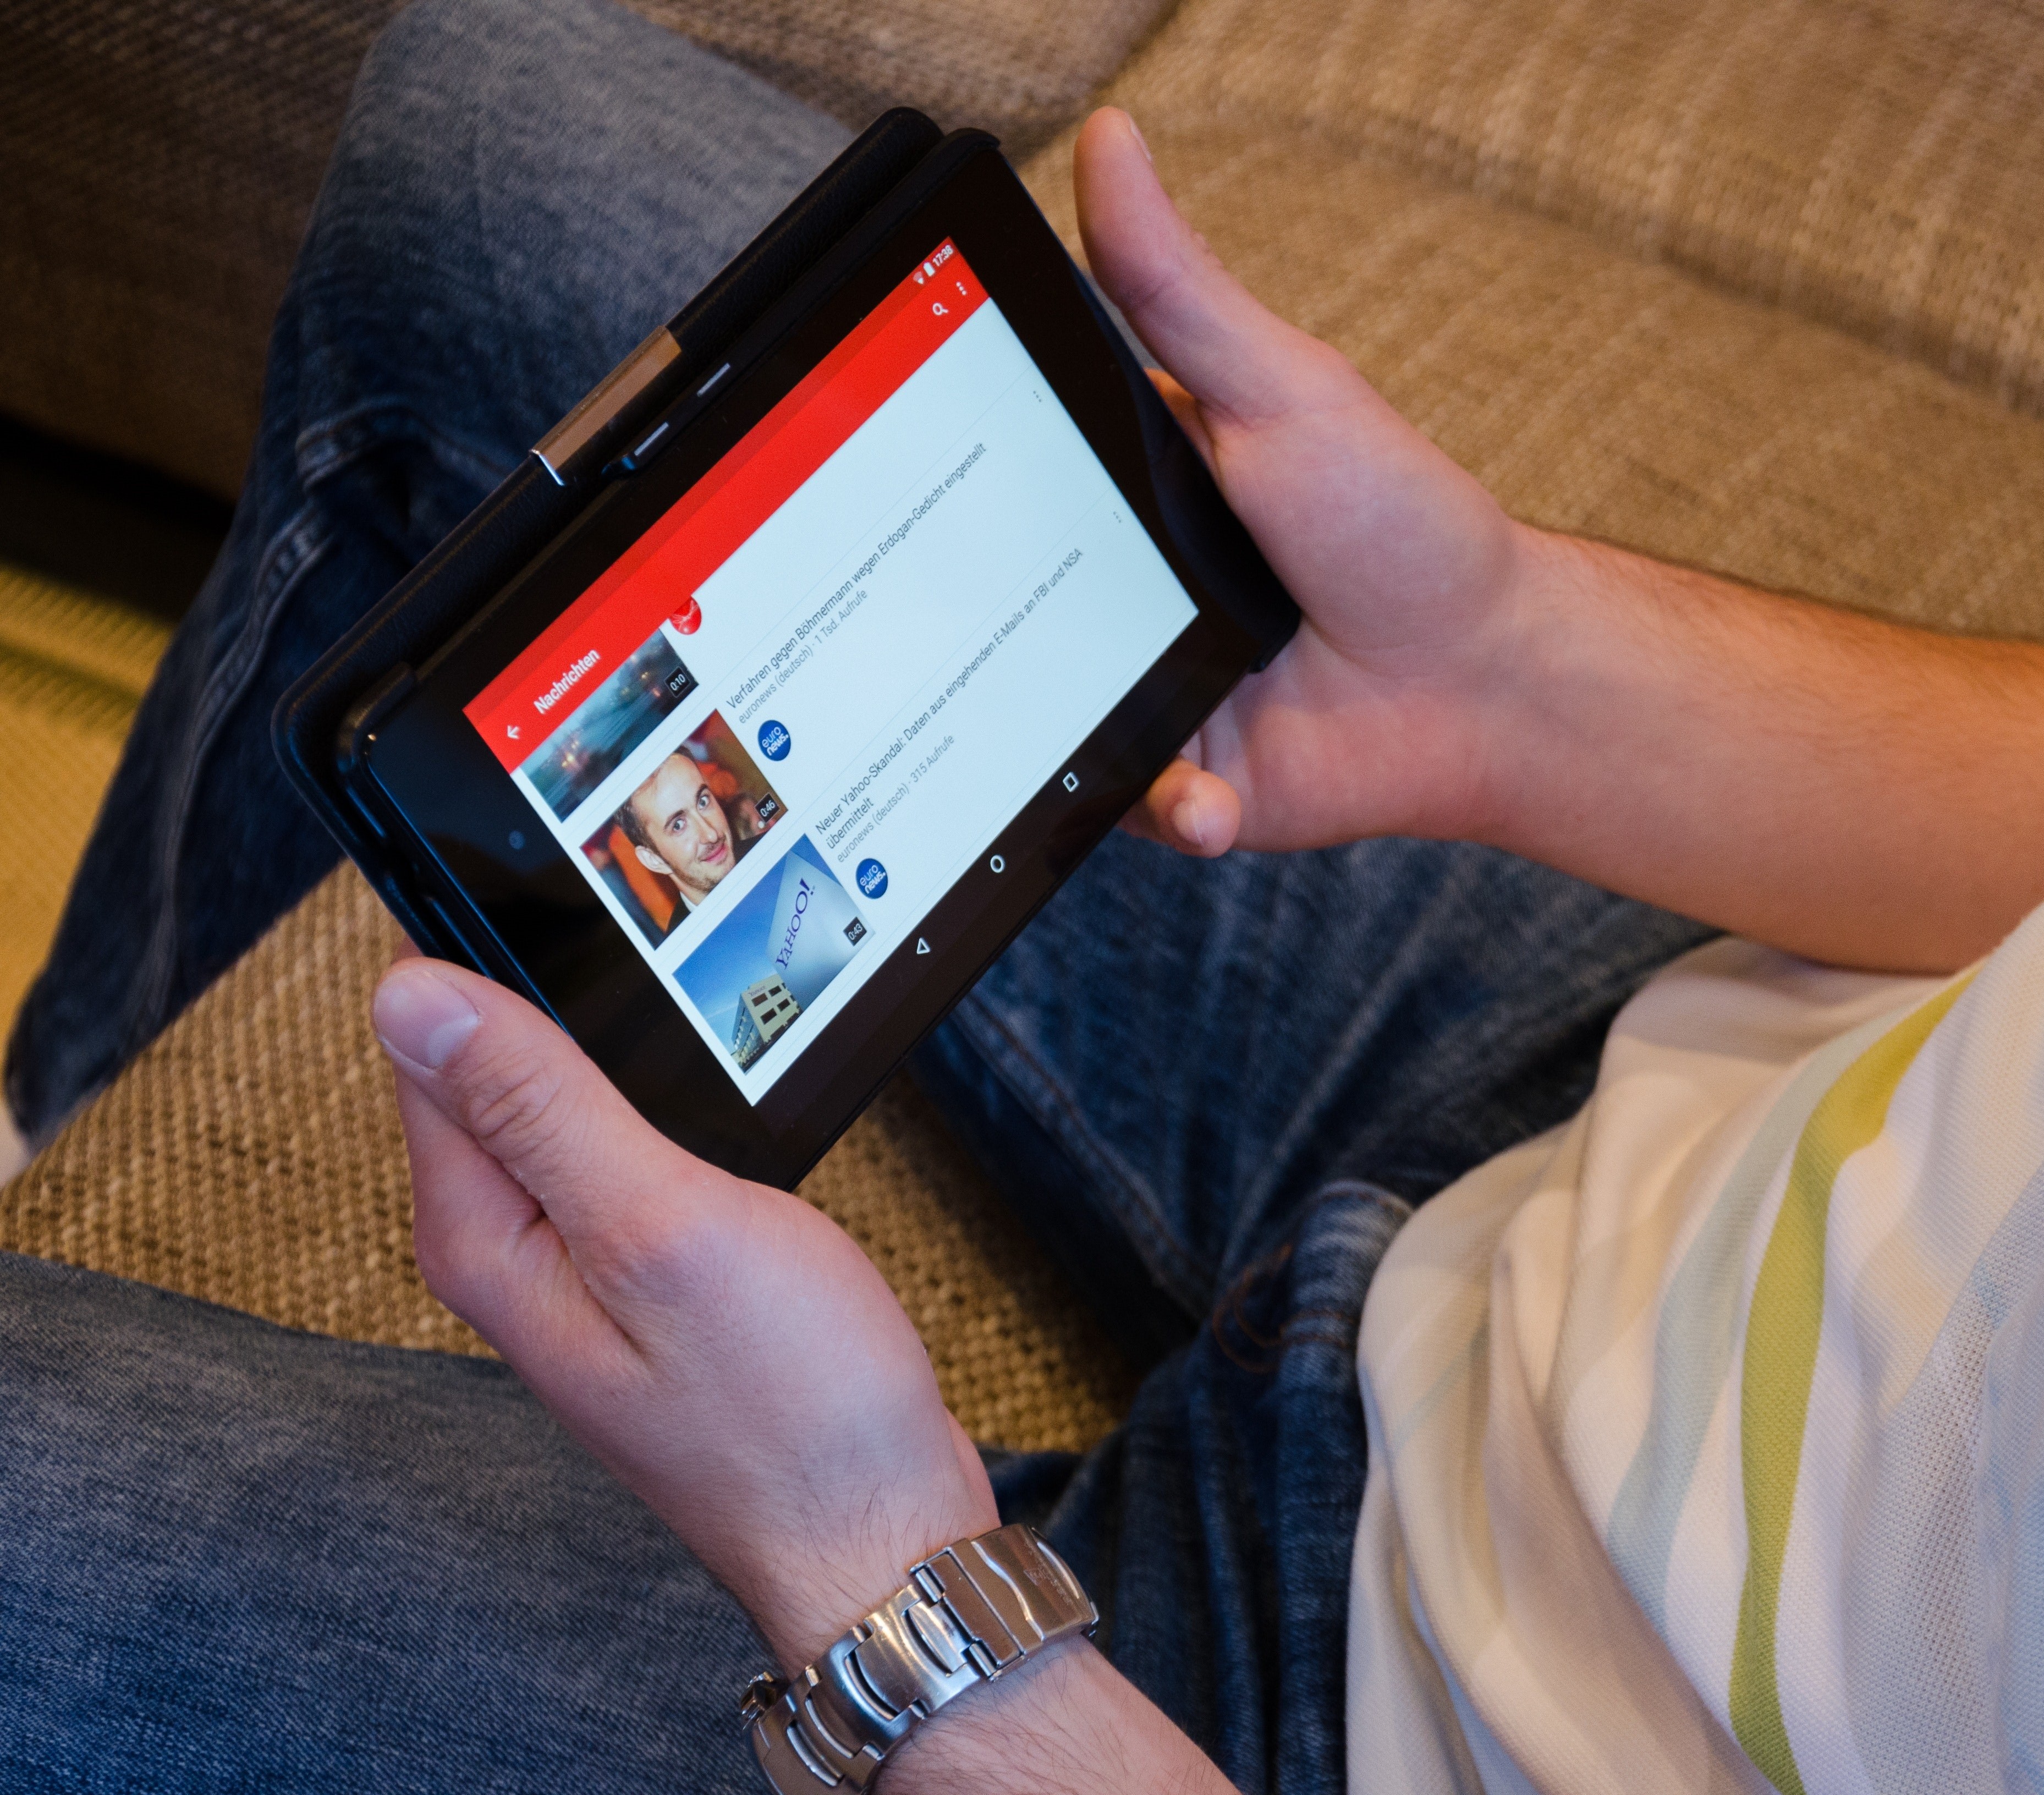 image of a person holding an ipad and scrolling through movies